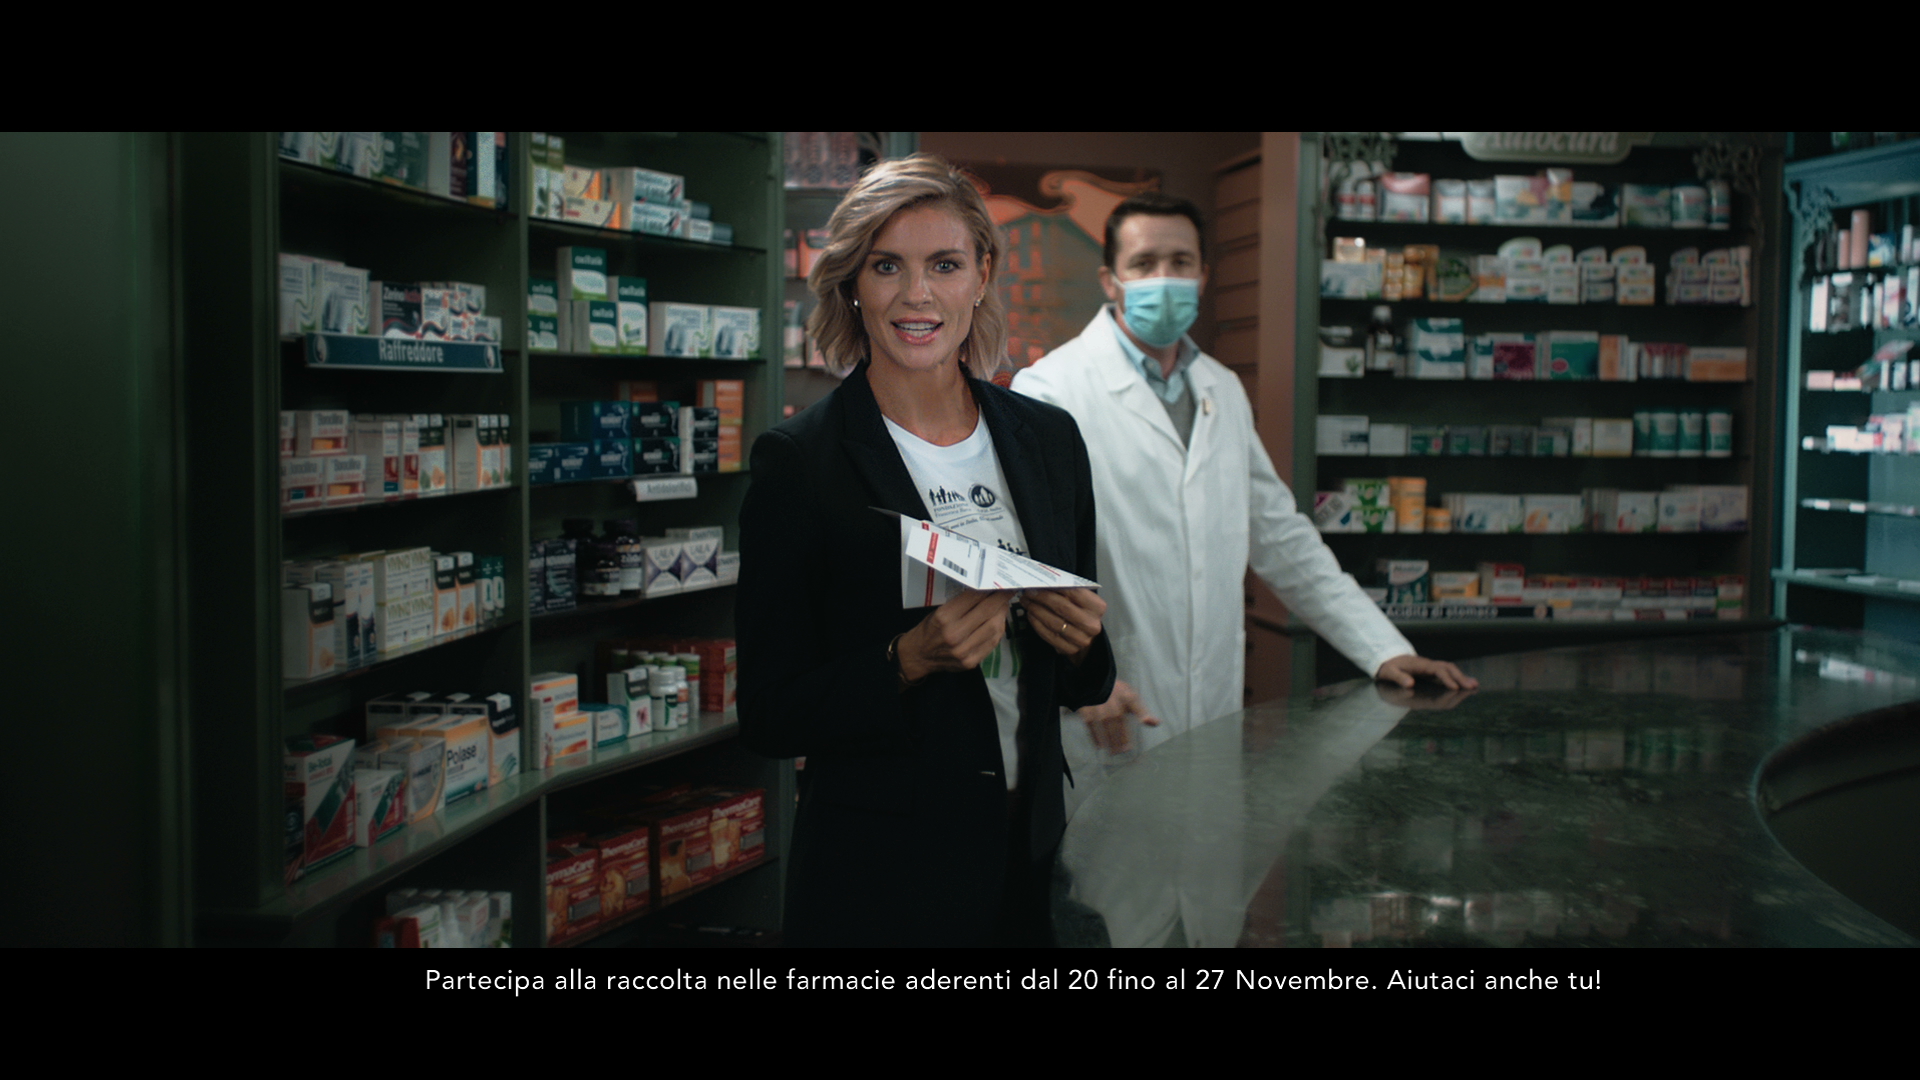 IN PHARMACIES FOR CHILDREN WITH THE FRANCESCA RAVA FOUNDATION TO HELP CHILDREN IN HEALTH POVERTY THE COVID-19 EMERGENCY HAS MADE THE INITIATIVE EVEN MORE URGENT.  THE INVITATION FROM MARTINA COLOMBARI: MAKE SOLIDARITY FLY HIGH WITH A CONCRETE GESTURE!              WITH AN AD DIRECTED BY FEDERICO BRUGIA, CREATED AND PRODUCED BY THE ARMANDO TESTA GROUP. PARTICIPATING PHARMACIES ON WWW.FONDAZIONEFRANCESCARAVA.ORG